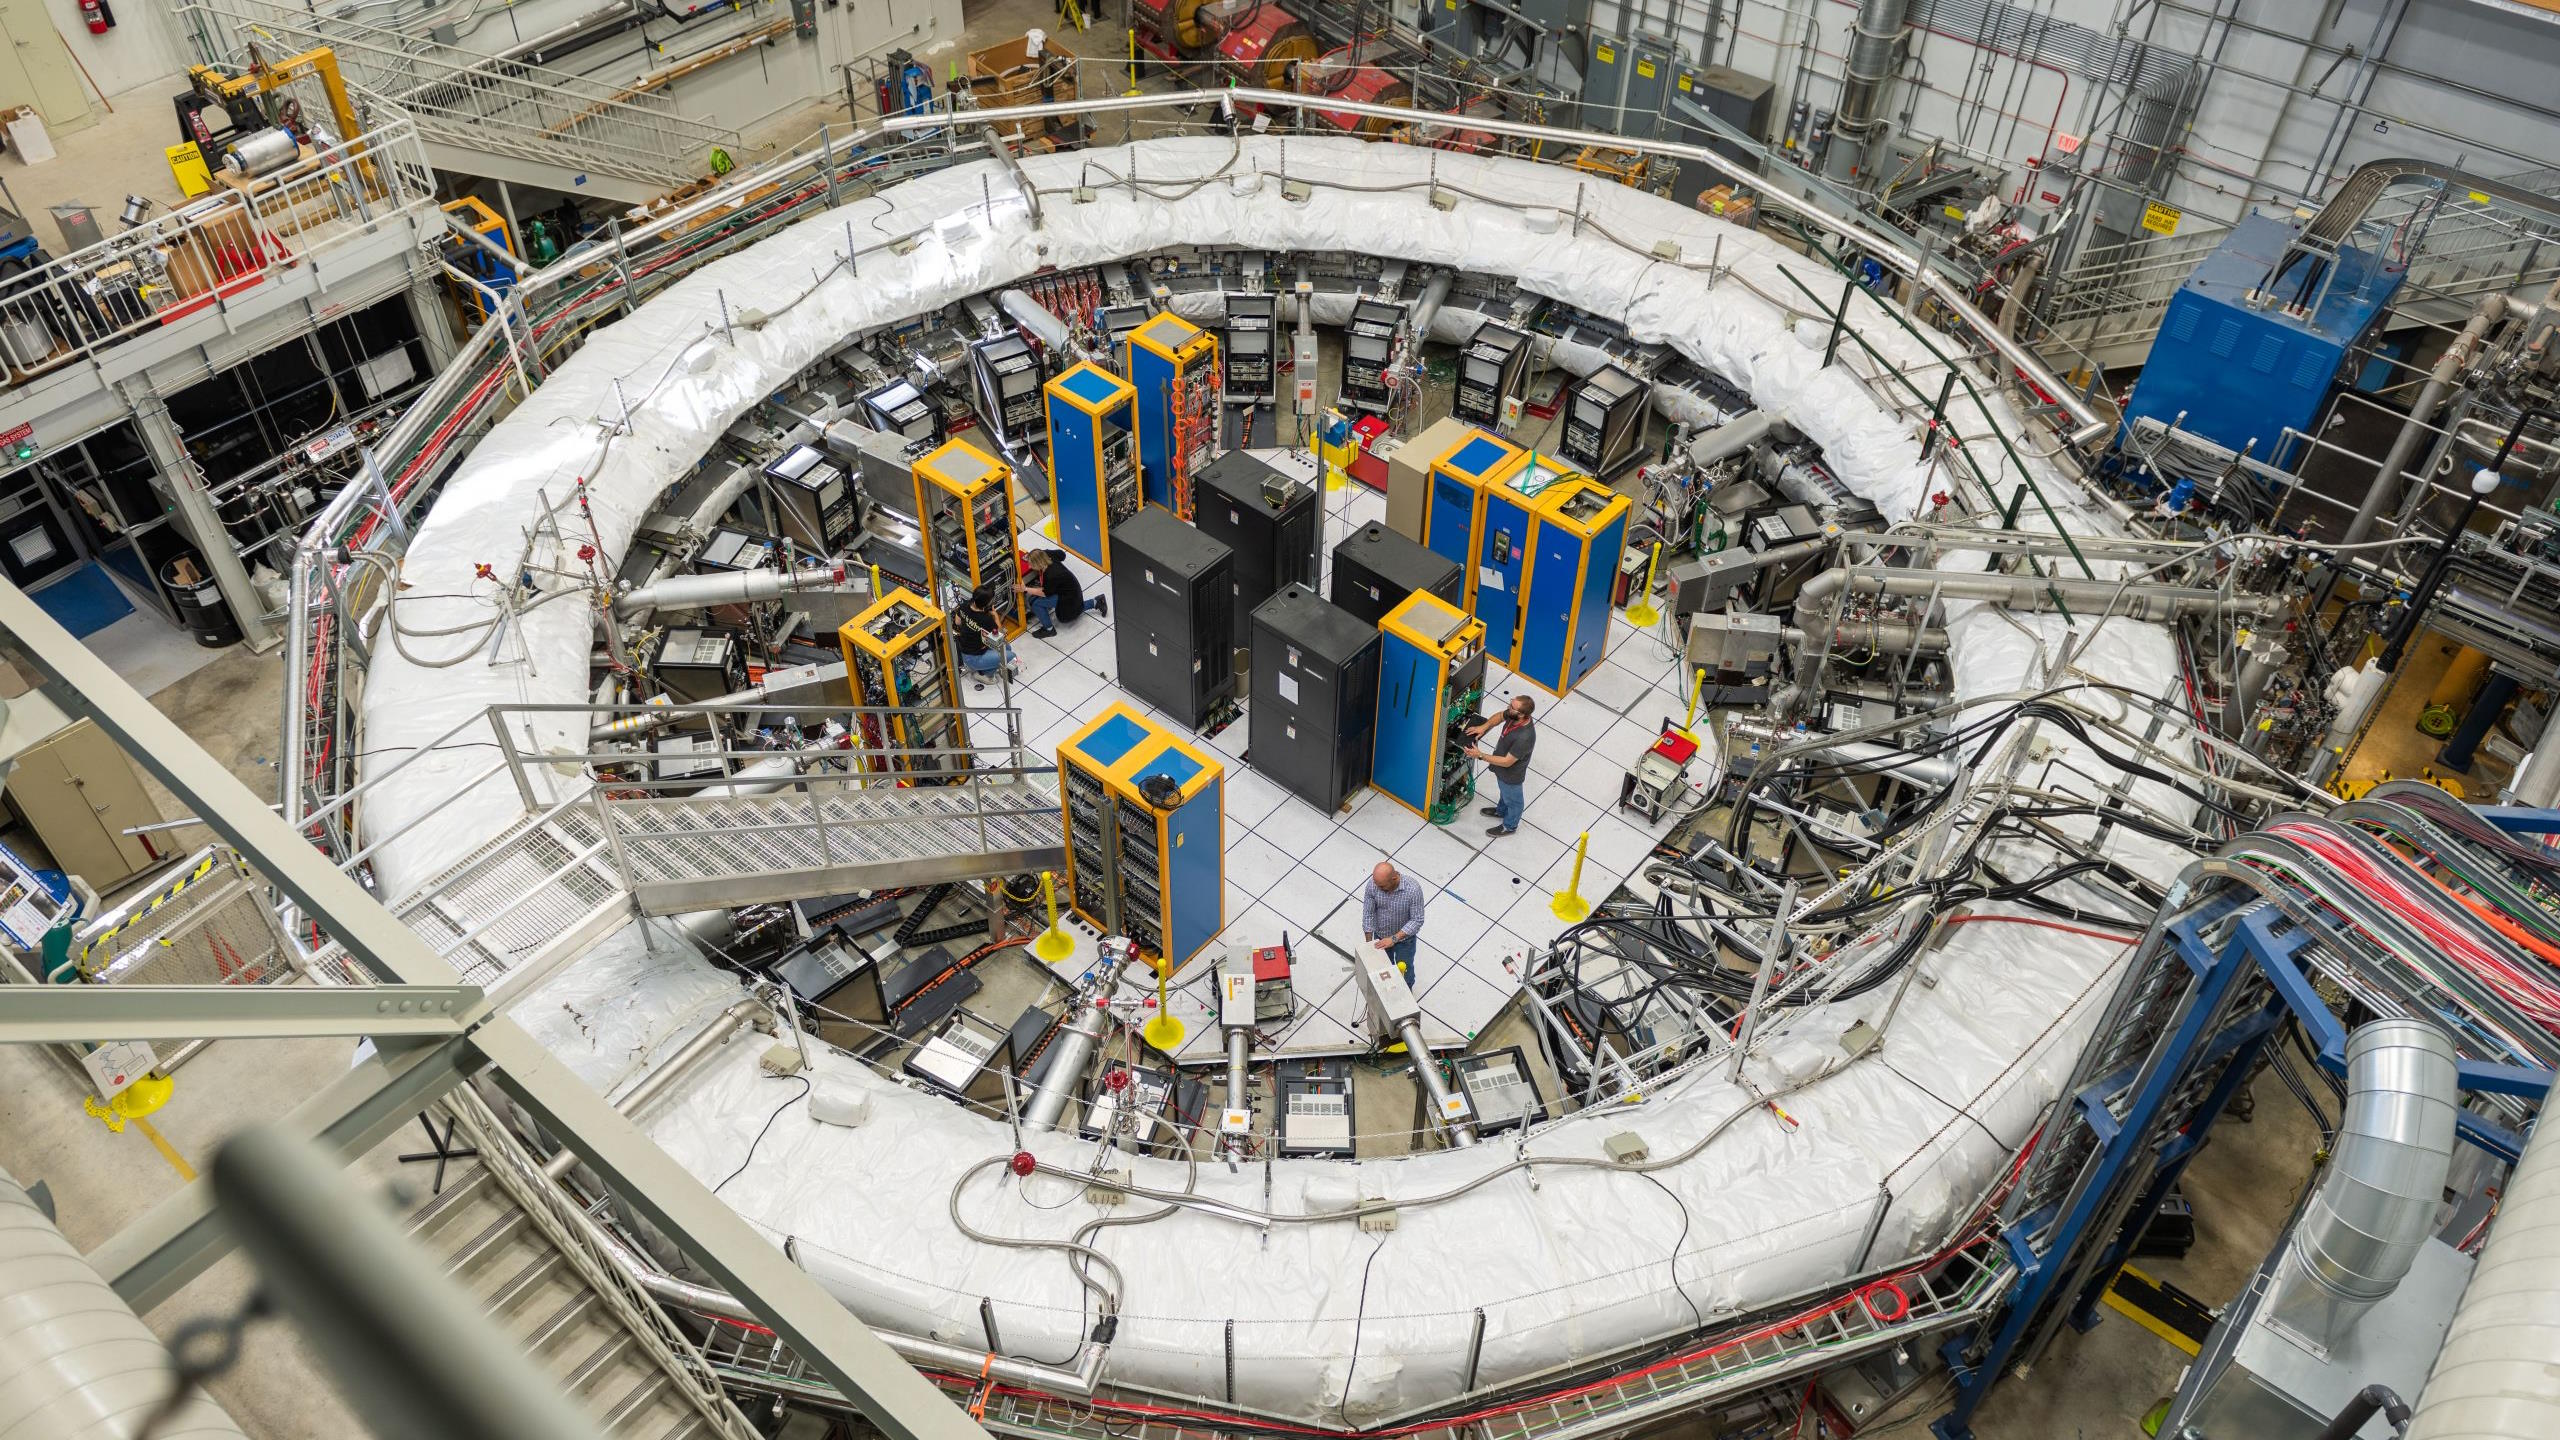 A large circular particle accelerator with several cables and machines is where engineers work inside and around the structure. The facility, dedicated to solving the muon g-2 anomaly, has platforms and specialized equipment surrounding the central structure.